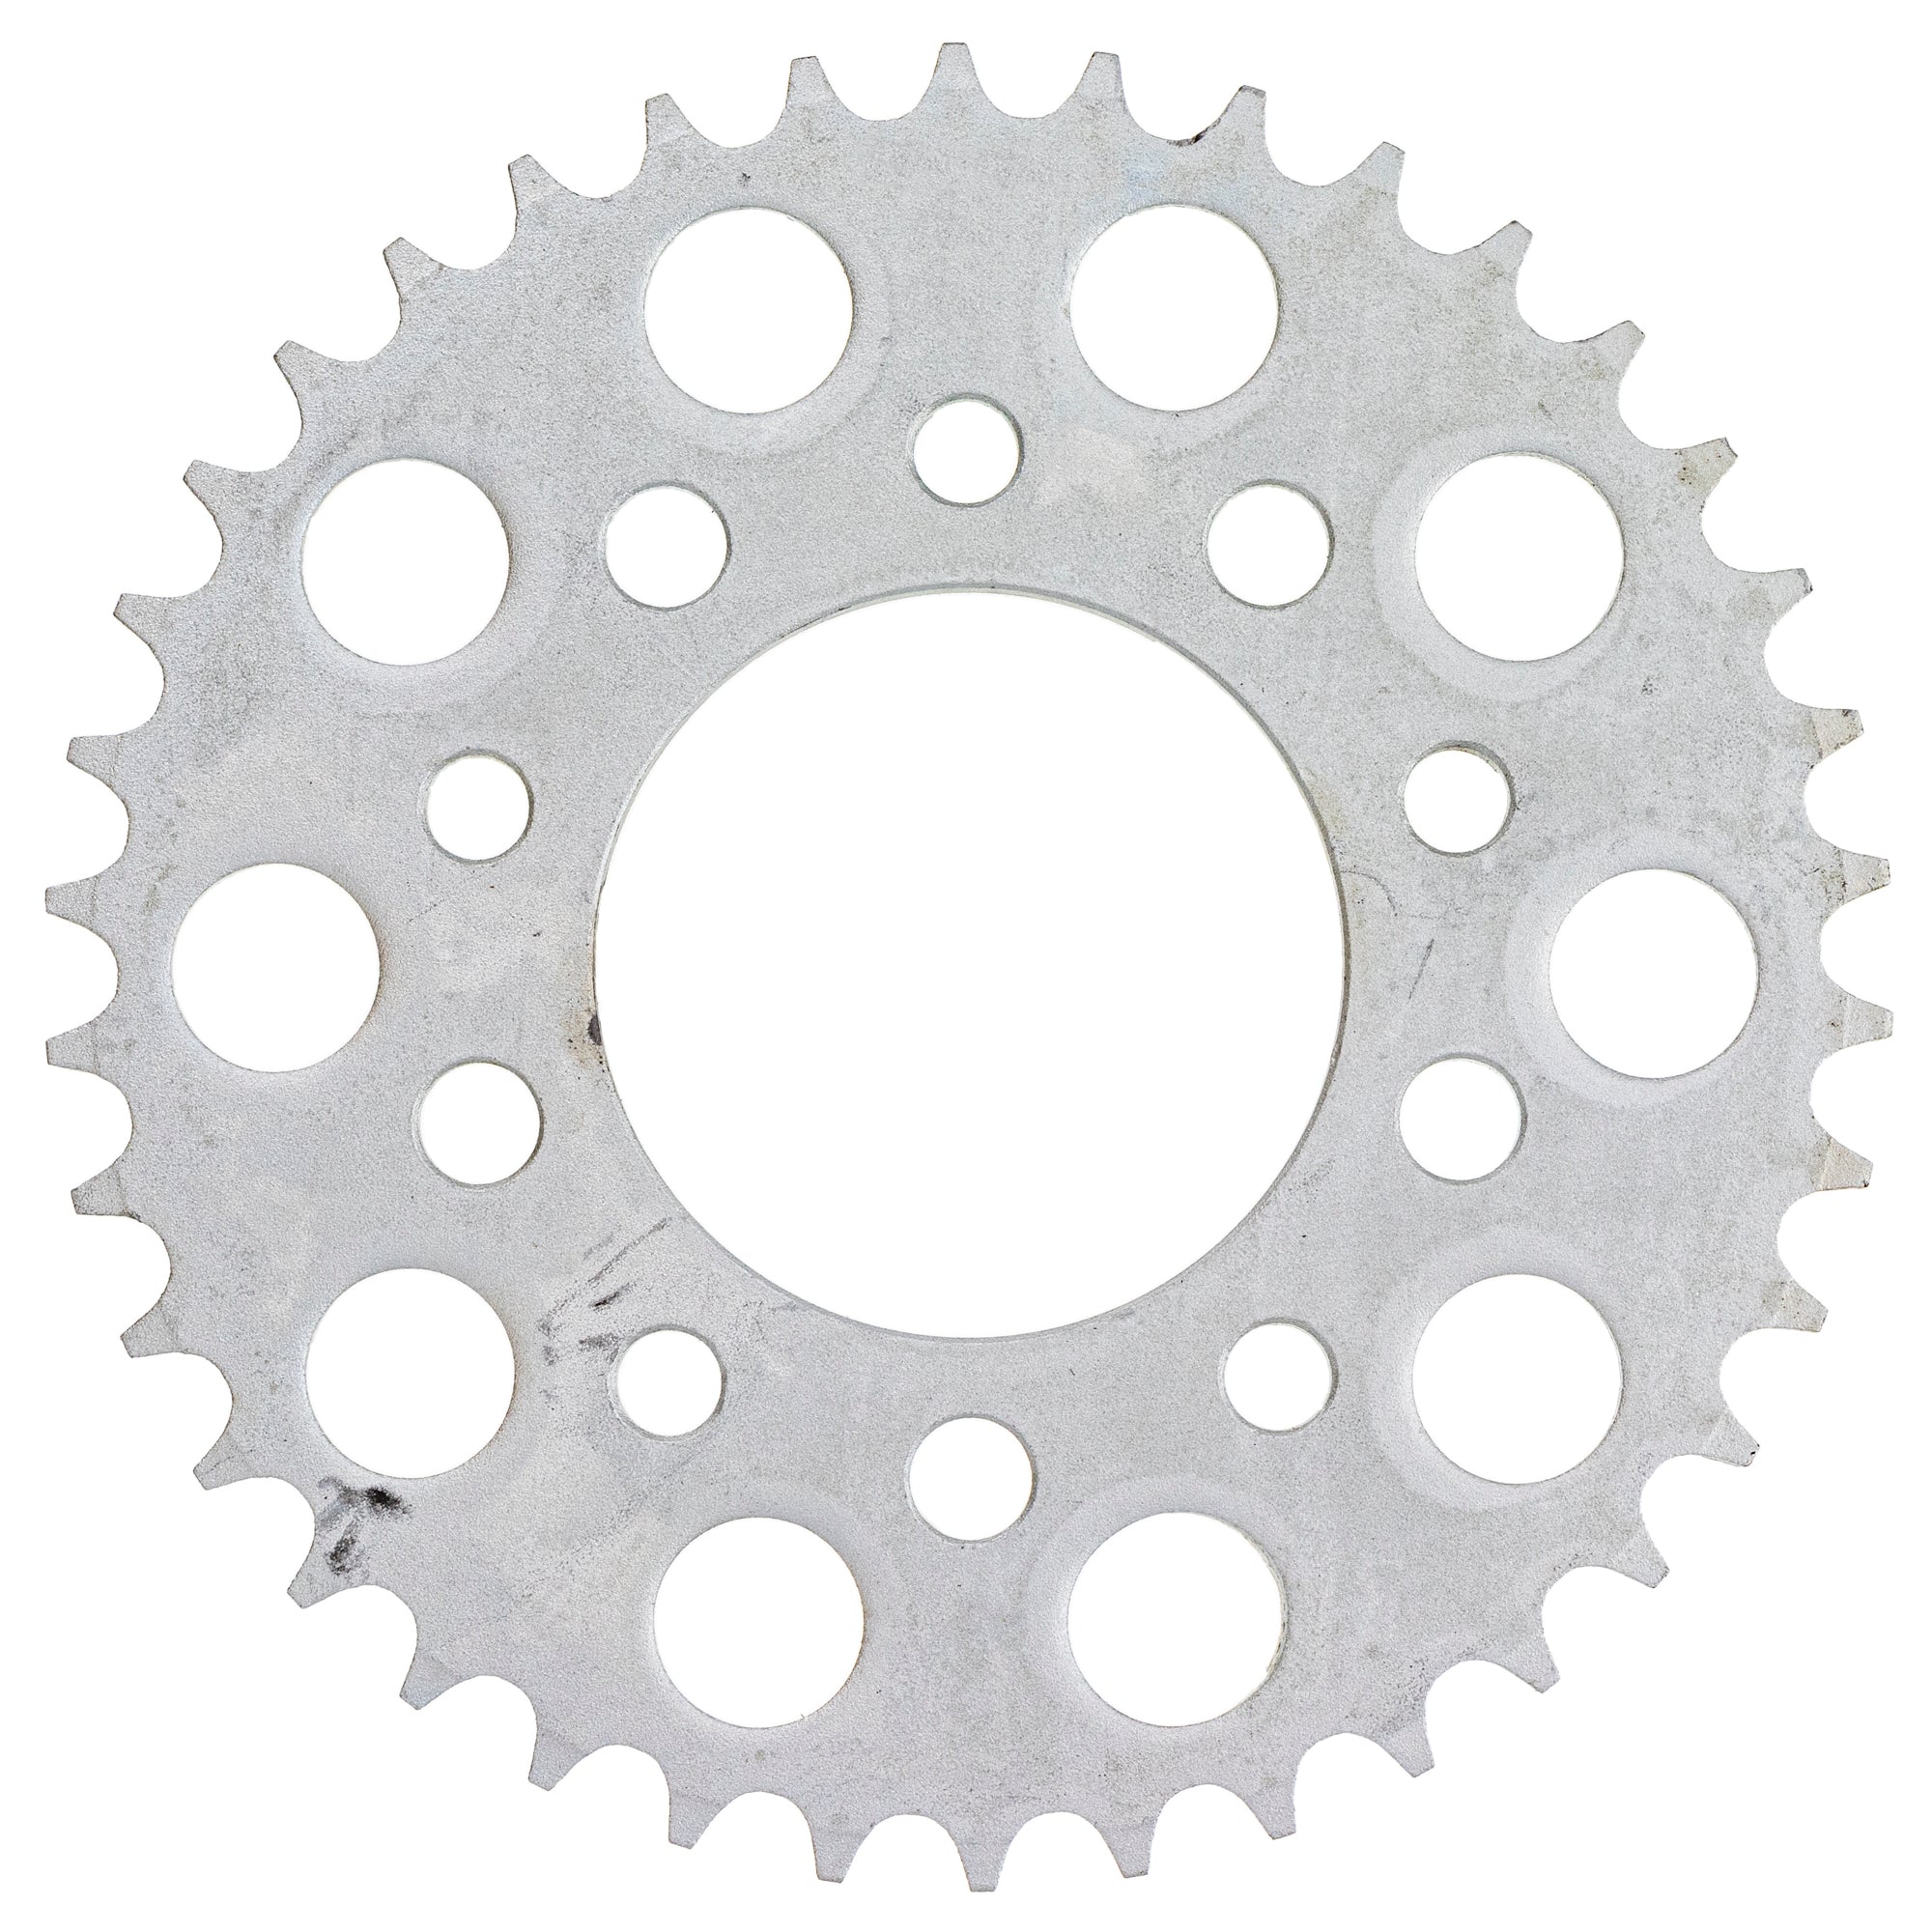 525 Pitch Front 15T Rear 38T Drive Sprocket Kit for Honda CB750